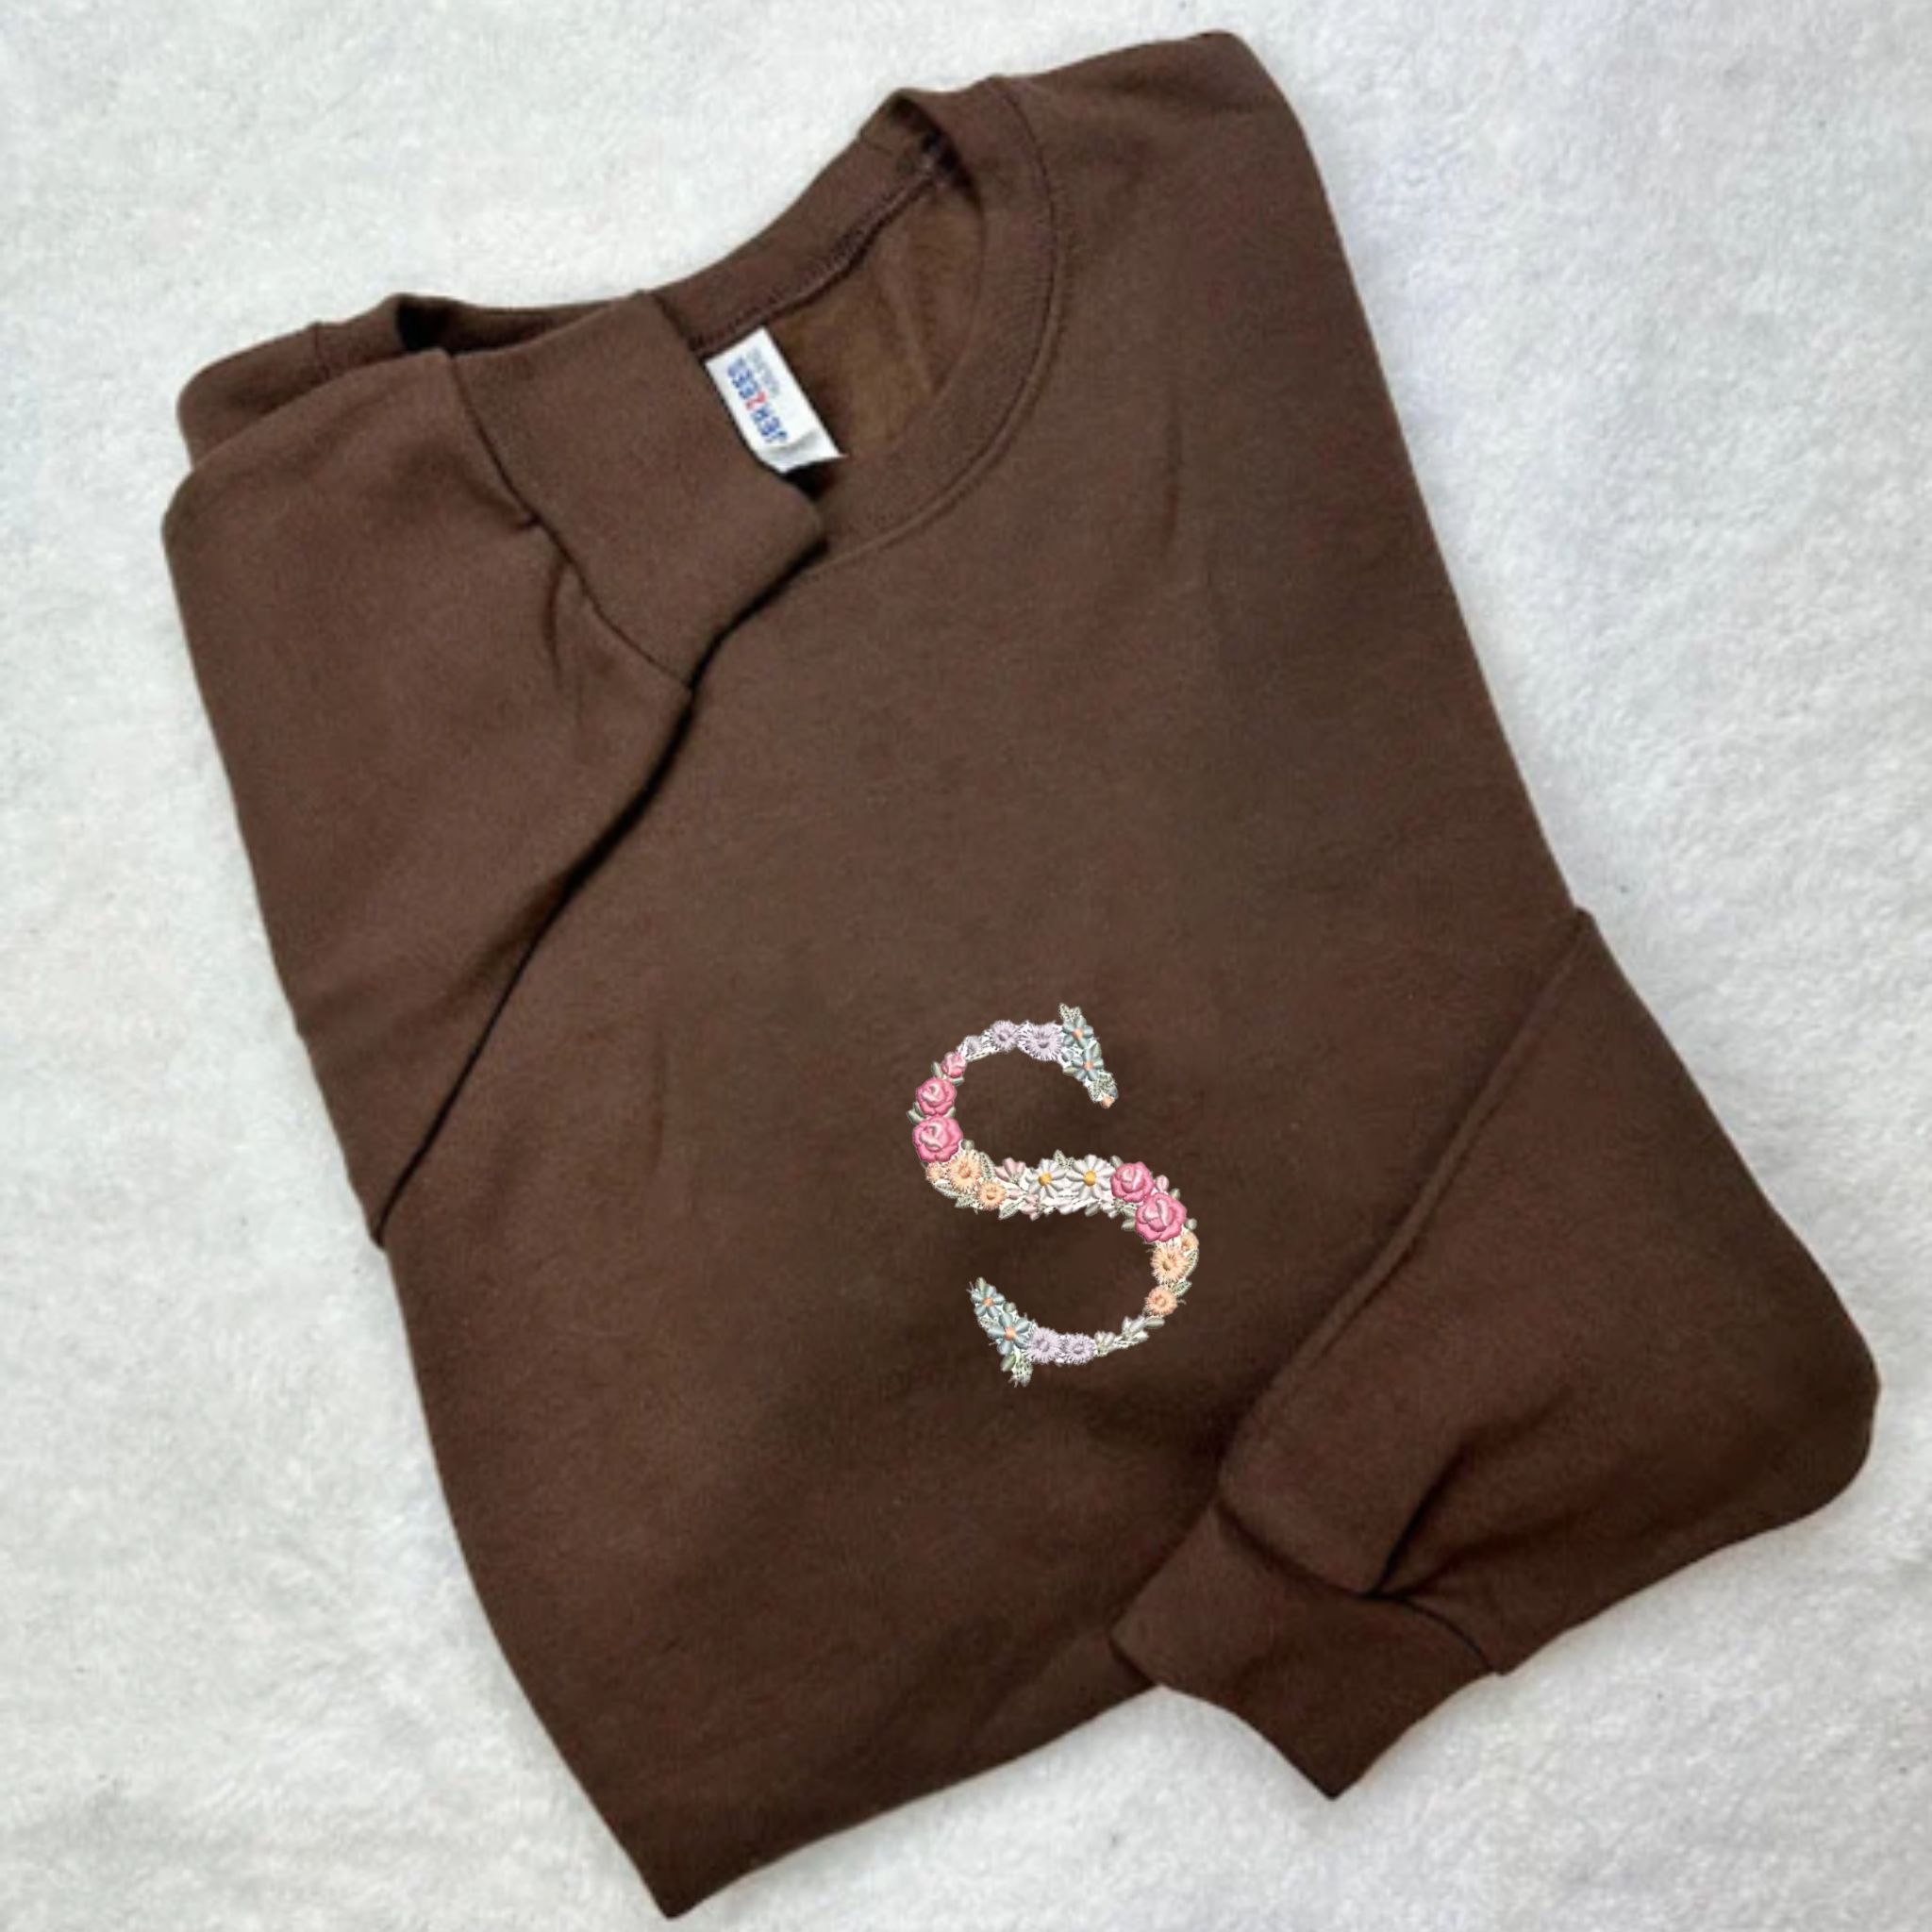 Cute Letter S Merch & Gifts for Sale | Redbubble